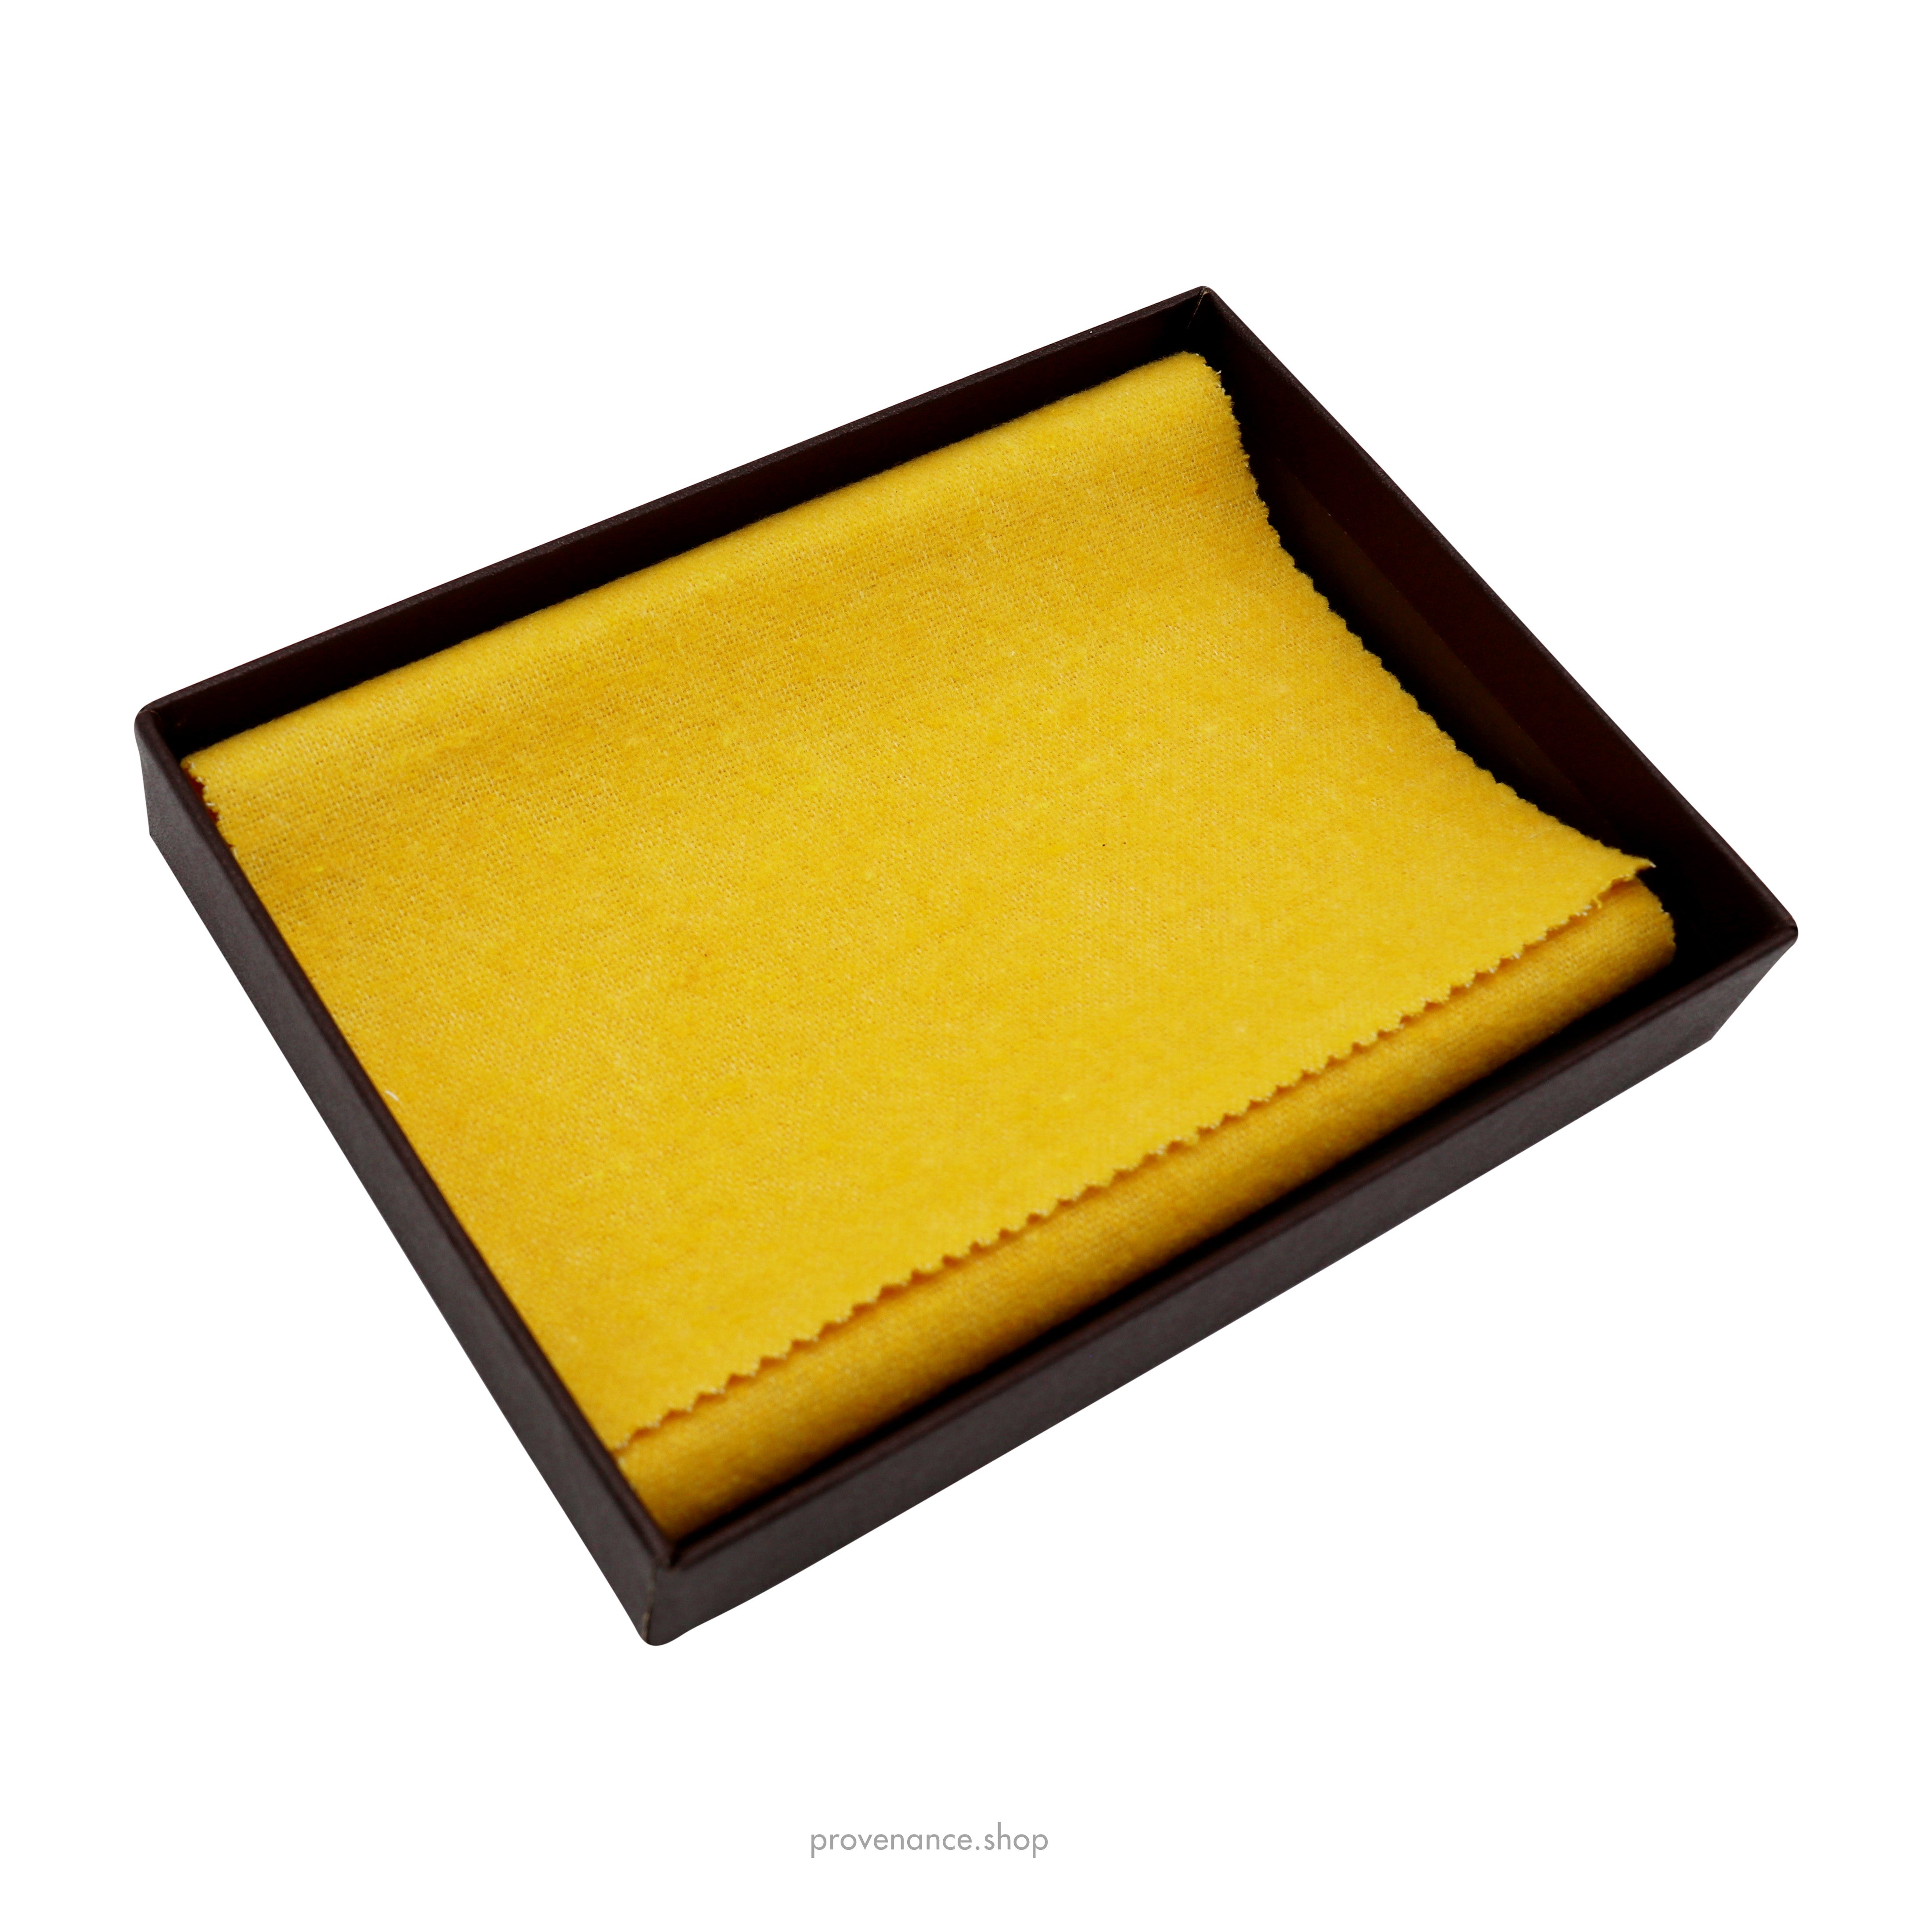 Saint sulpice leather card wallet Goyard Yellow in Leather - 36303300